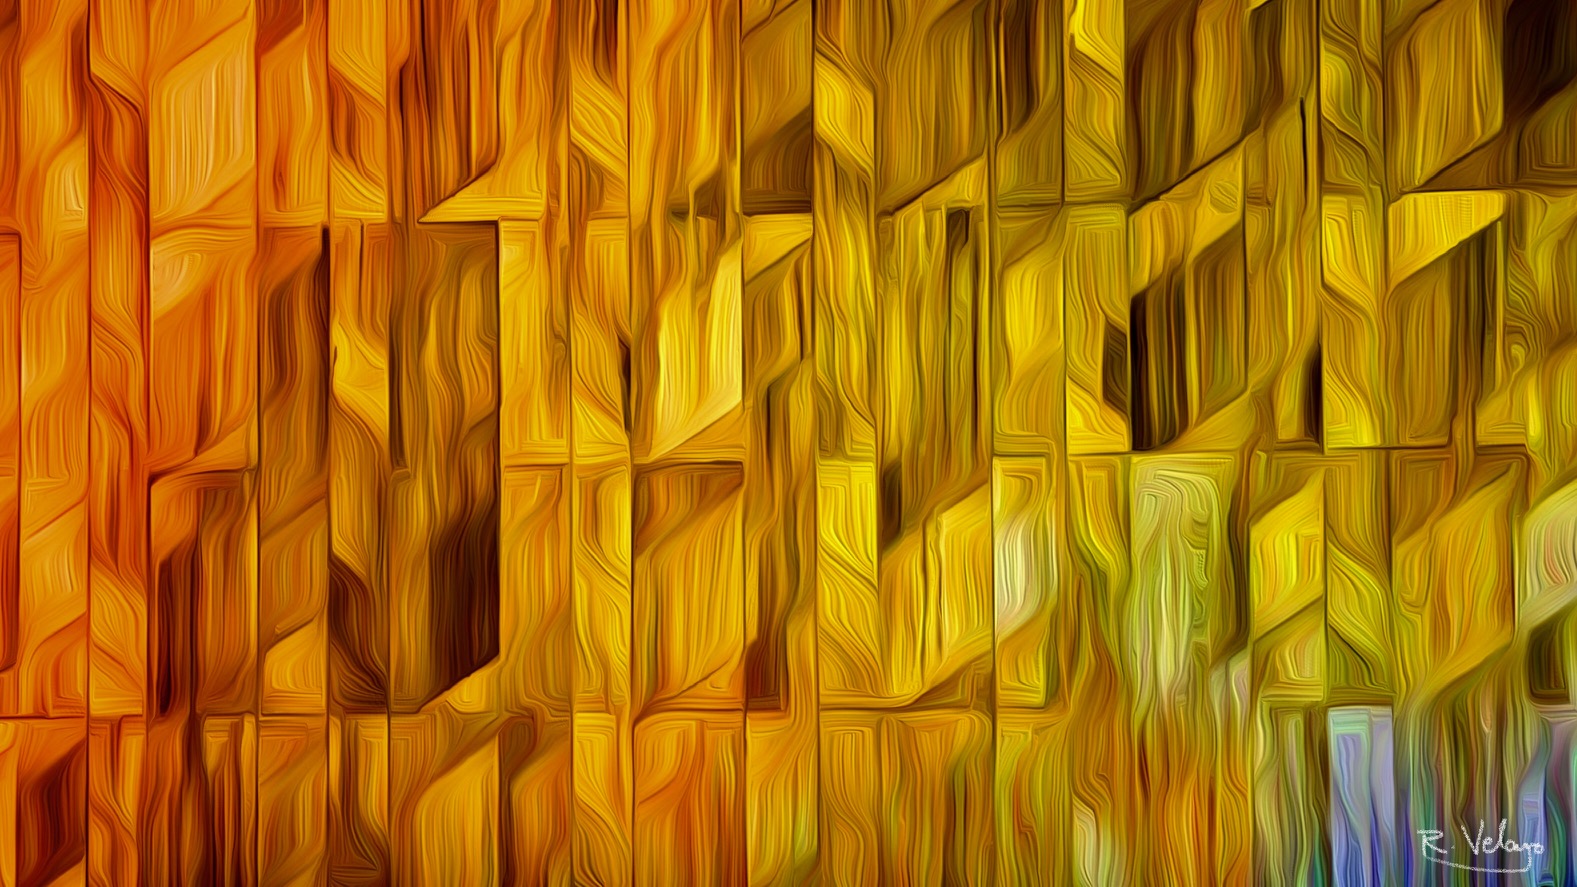 "REFLECTIONS OF WAVES AND COLORS ON A GRID" [Created: 4/30/2021]